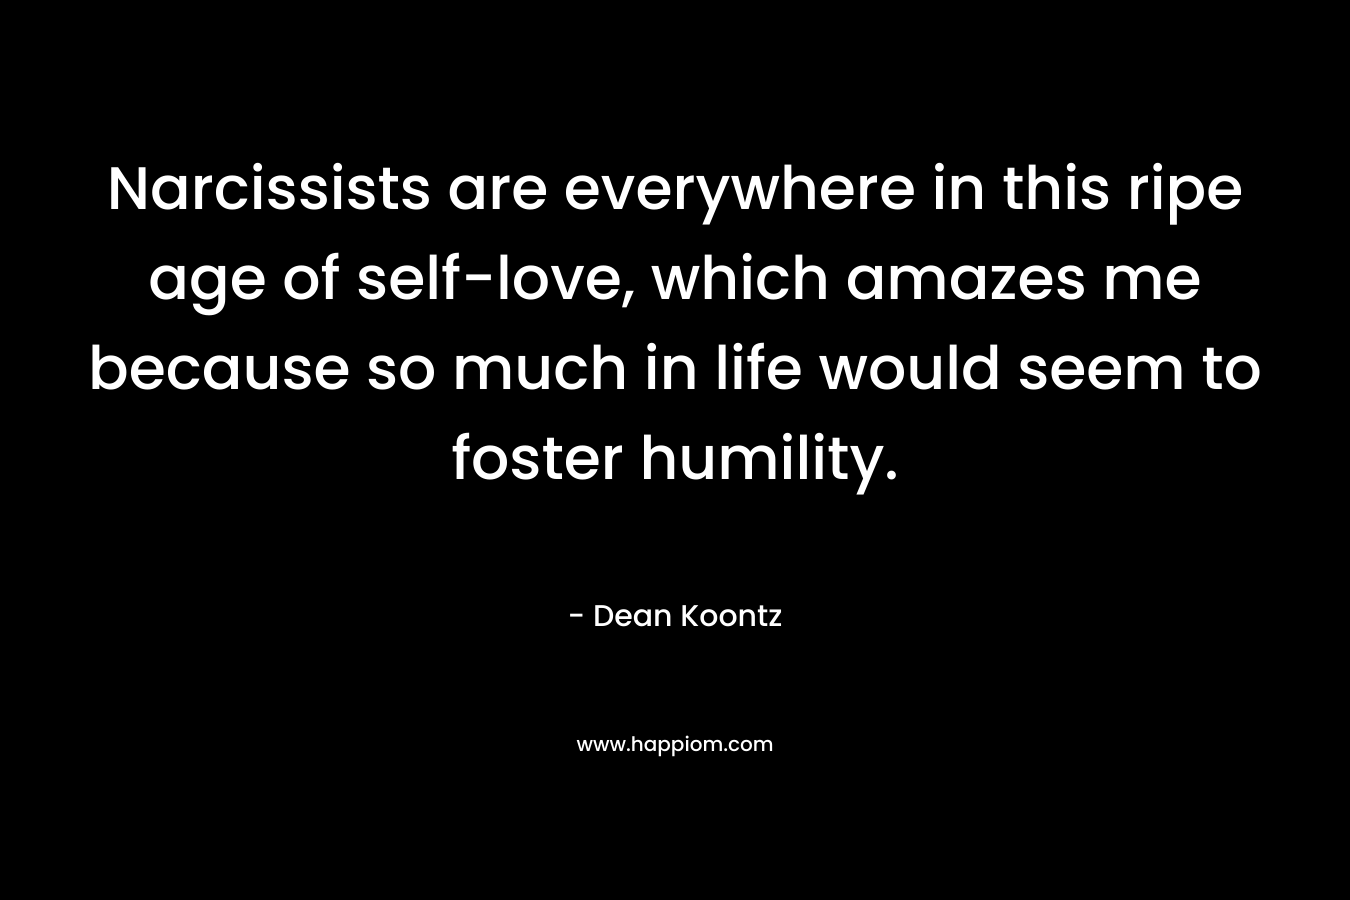 Narcissists are everywhere in this ripe age of self-love, which amazes me because so much in life would seem to foster humility.